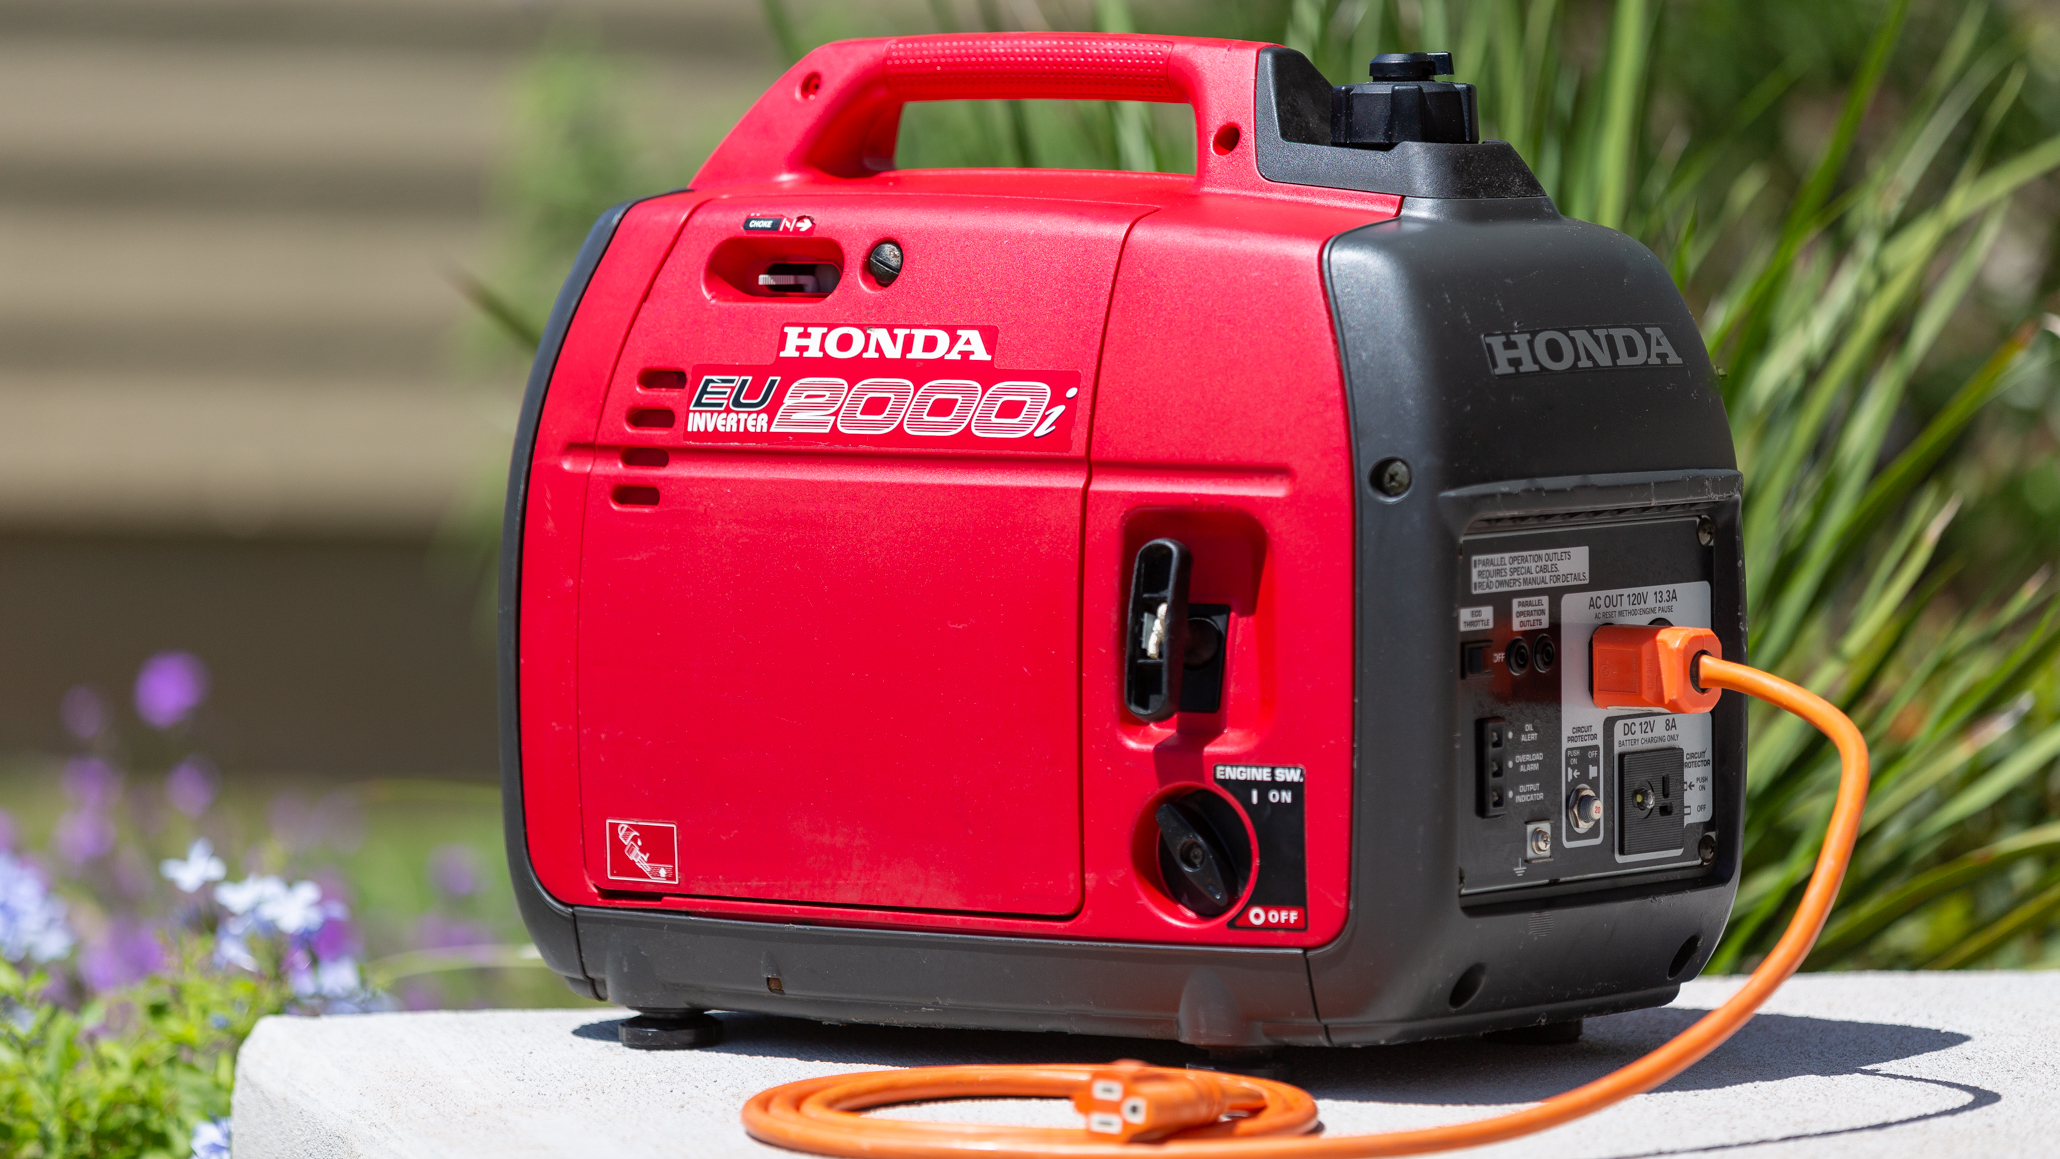 Don't fret if a power outlet is not available at your next outdoor event. Small power generators, like this Honda model, can provide plenty of power while making little noise. Image: Digitized House Media.